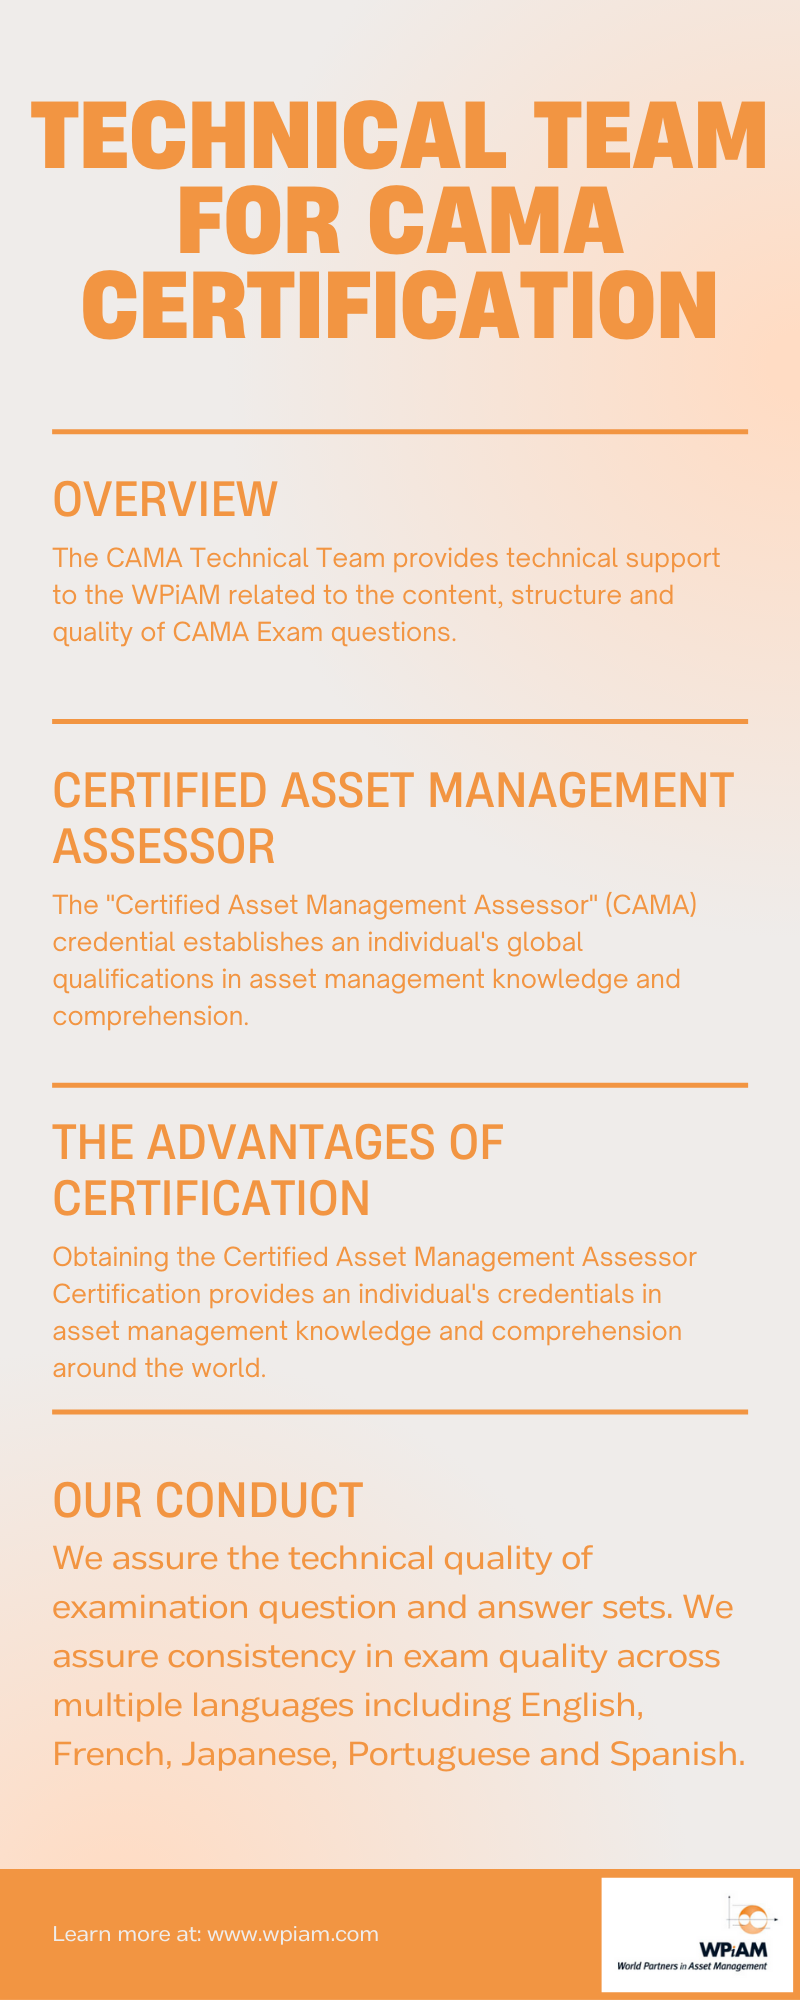 TECHNICAL TEAM FOR CAMA CERTIFICATION